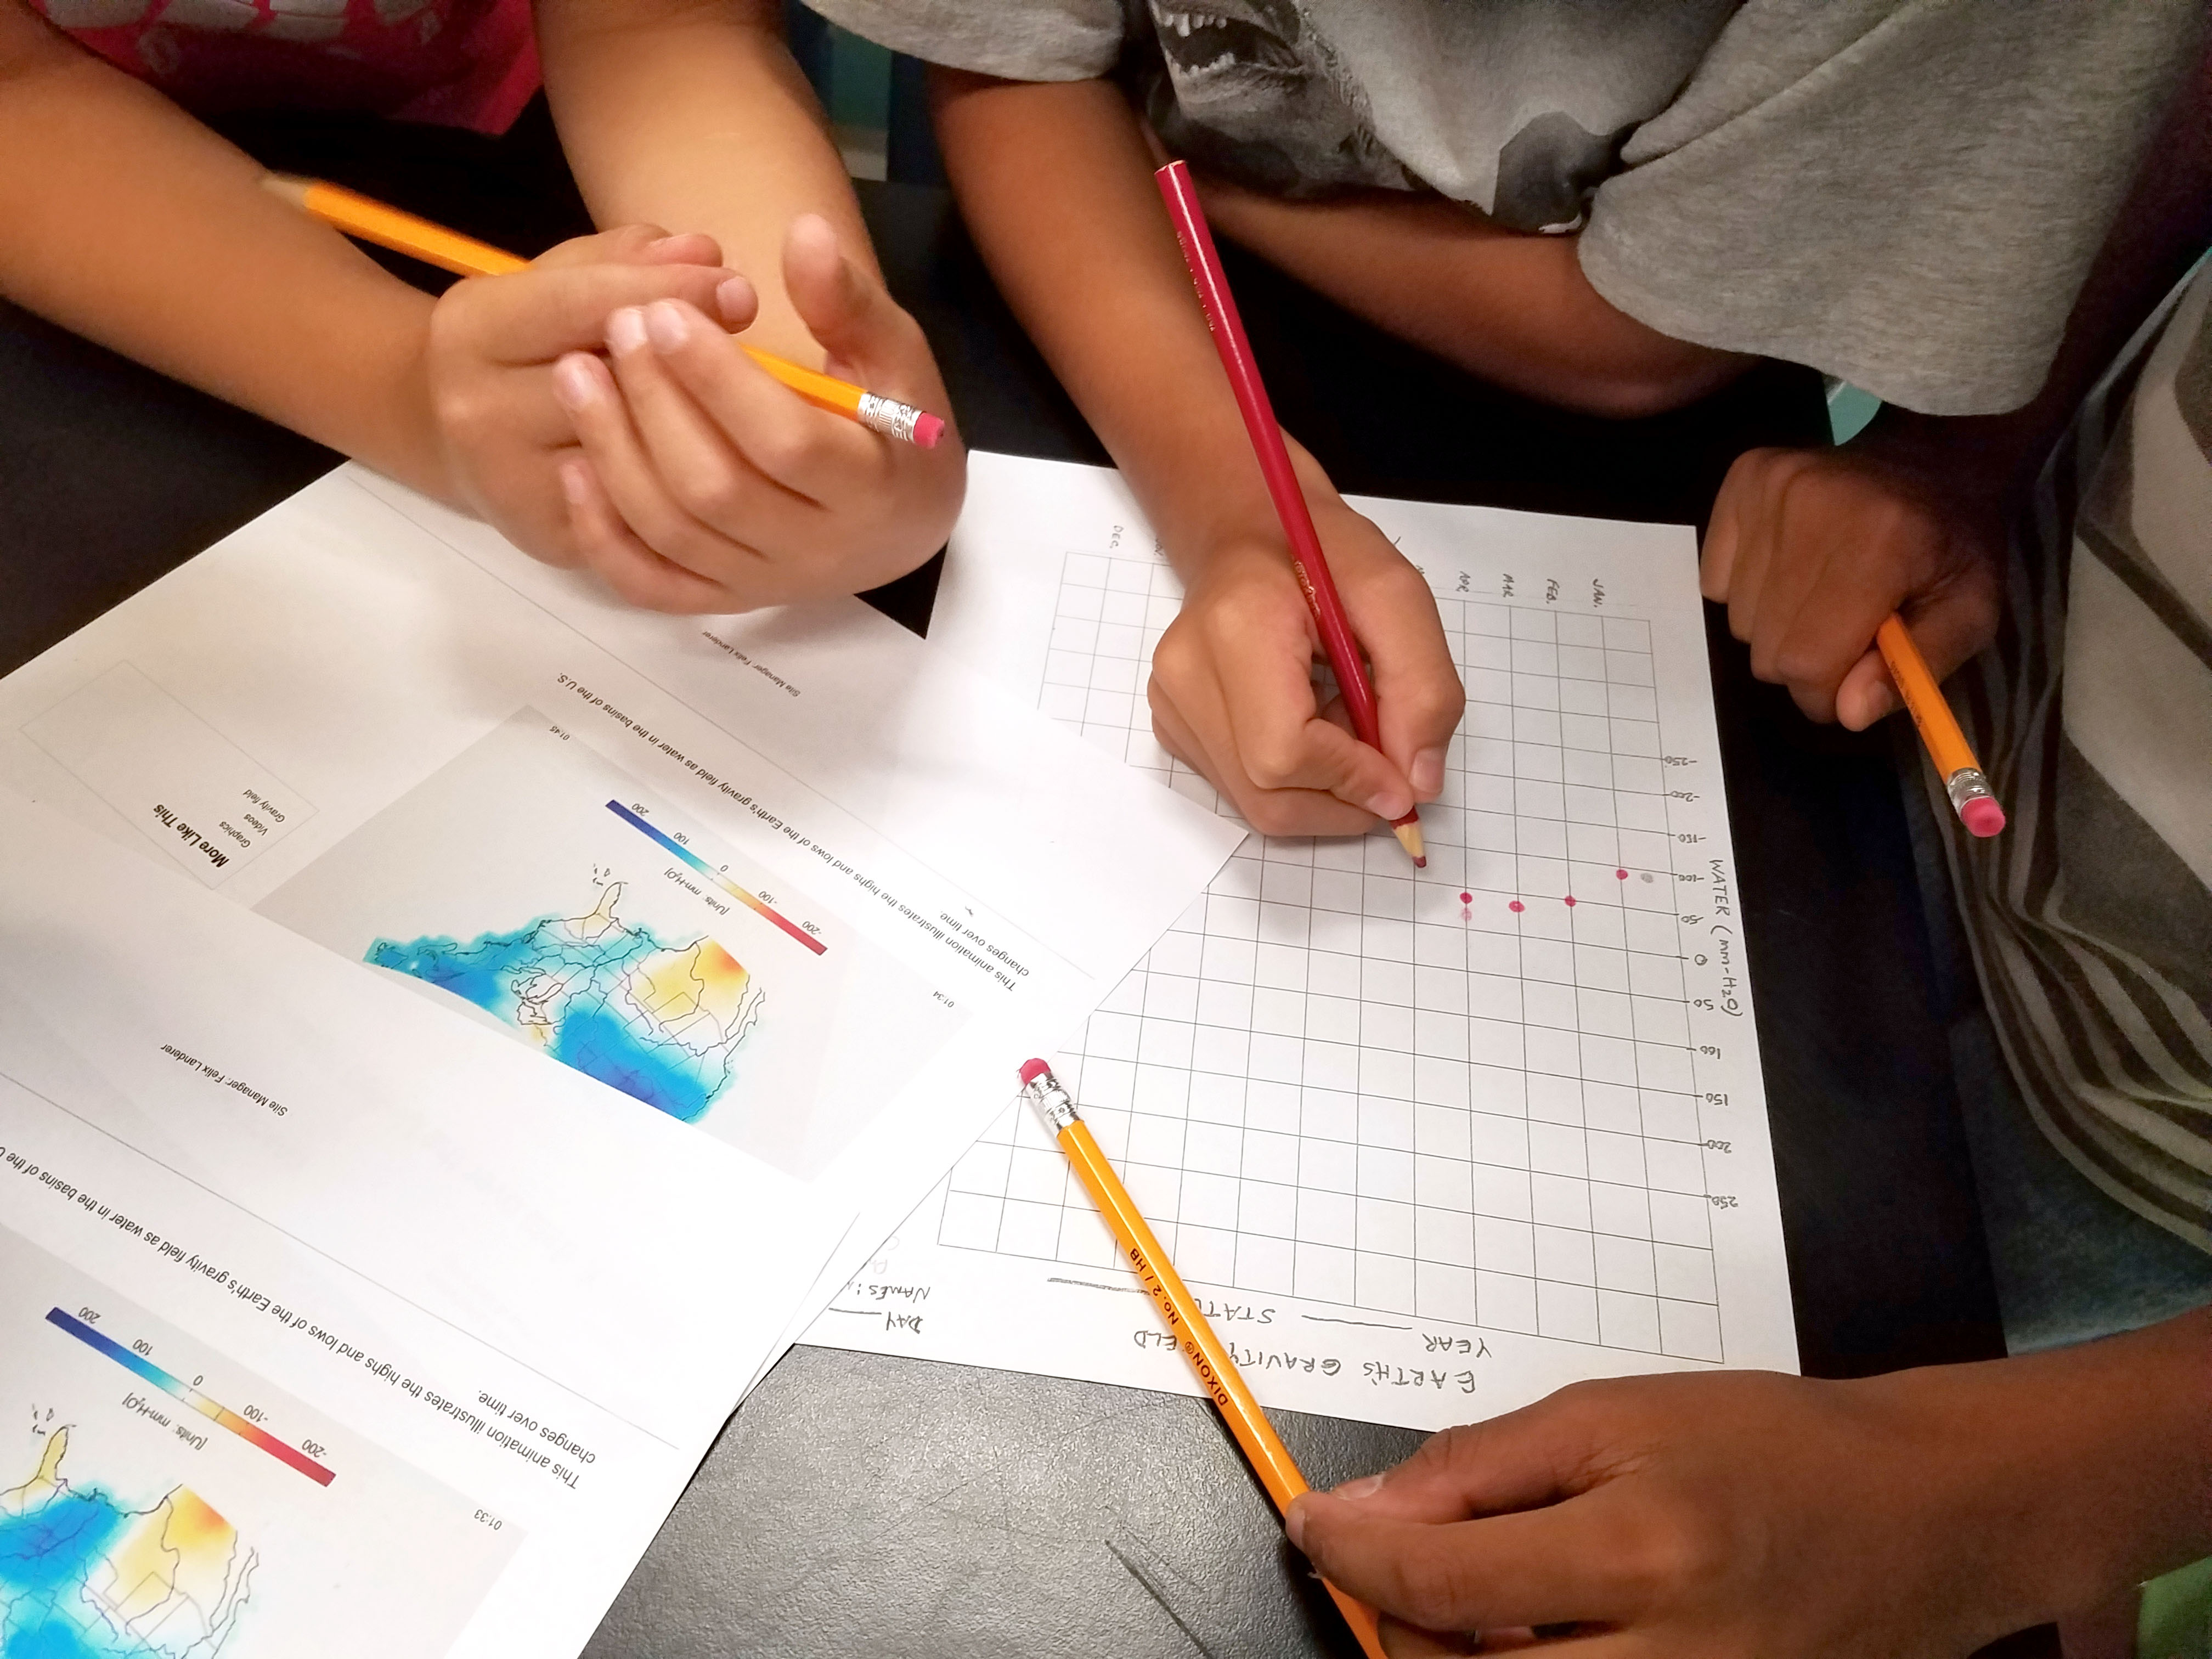 Students plot changes in Earth's gravitational field using data from NASA's GRACE mission.